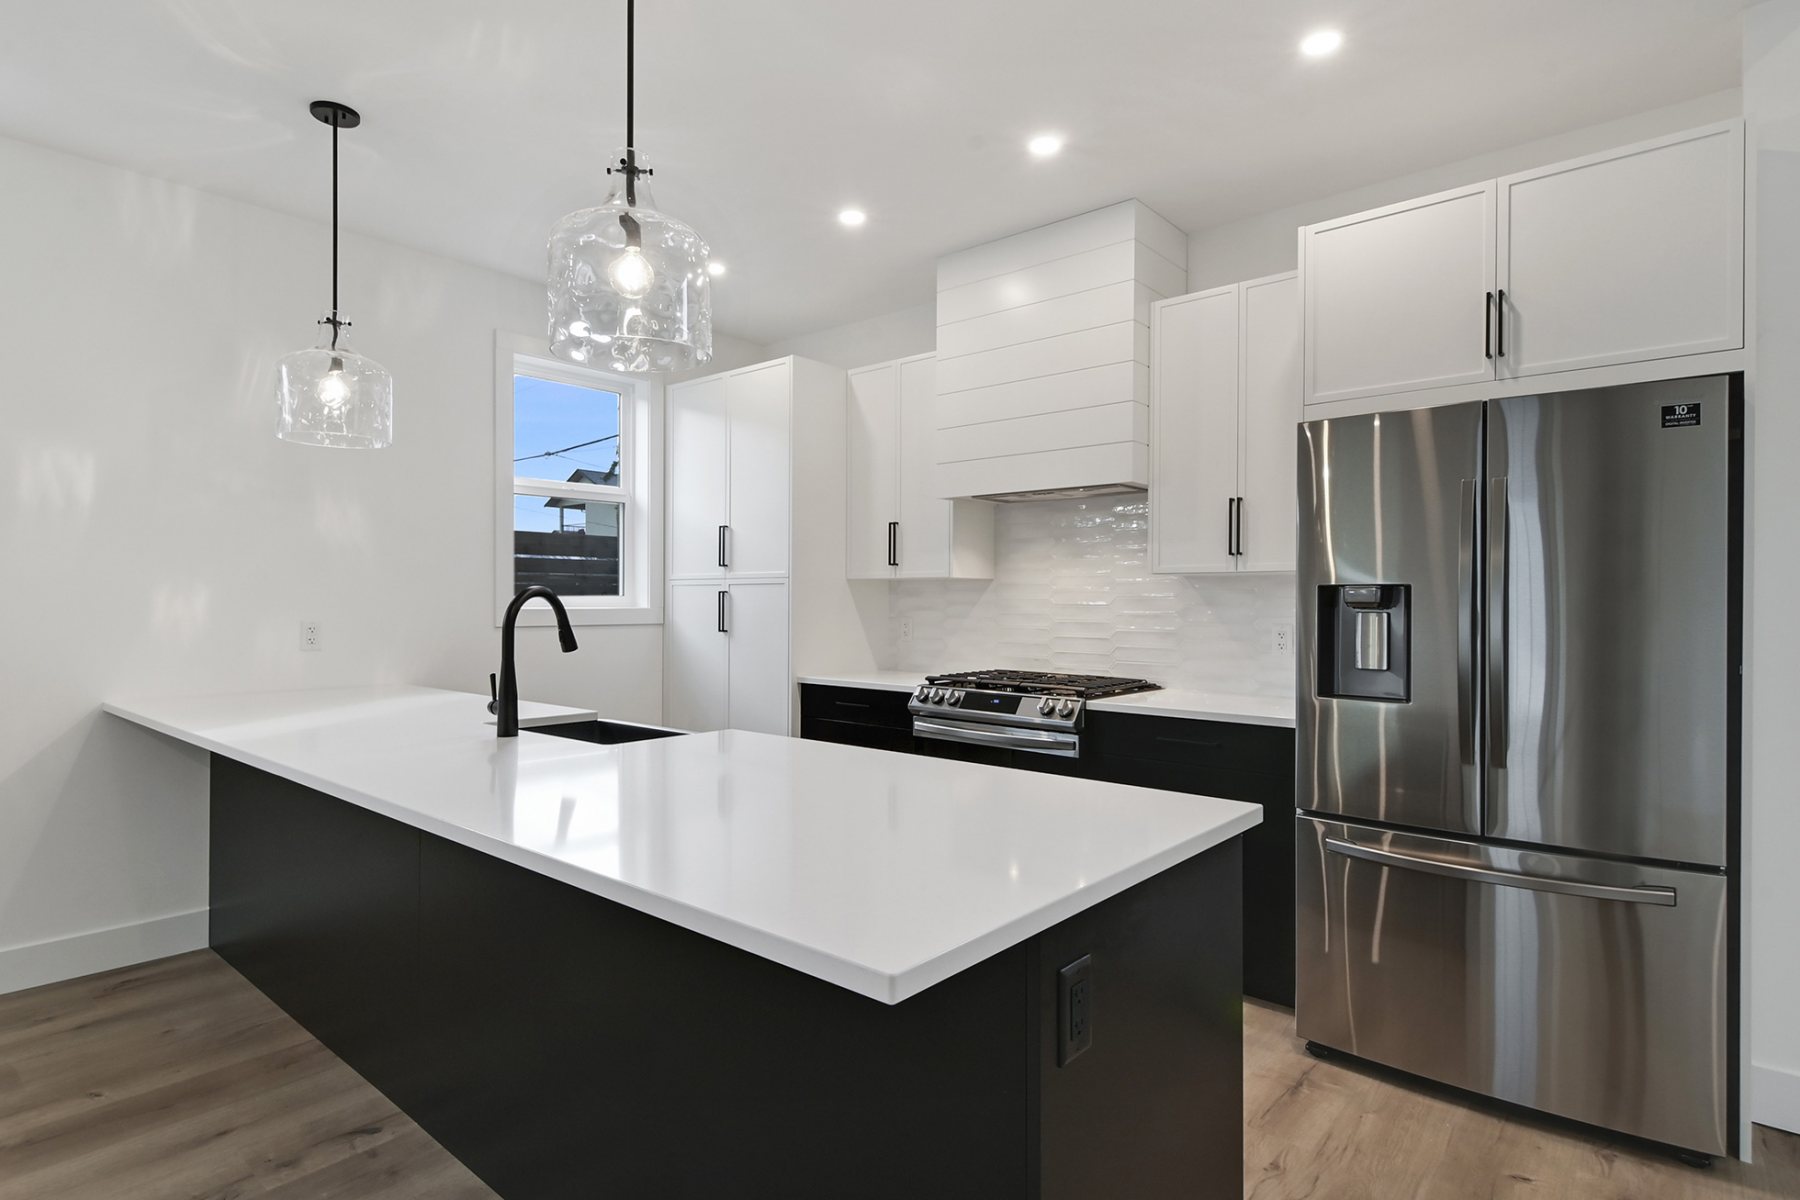 1_harmony_homes_patterson_ave_infill_project_kitchen_gallery_image_12